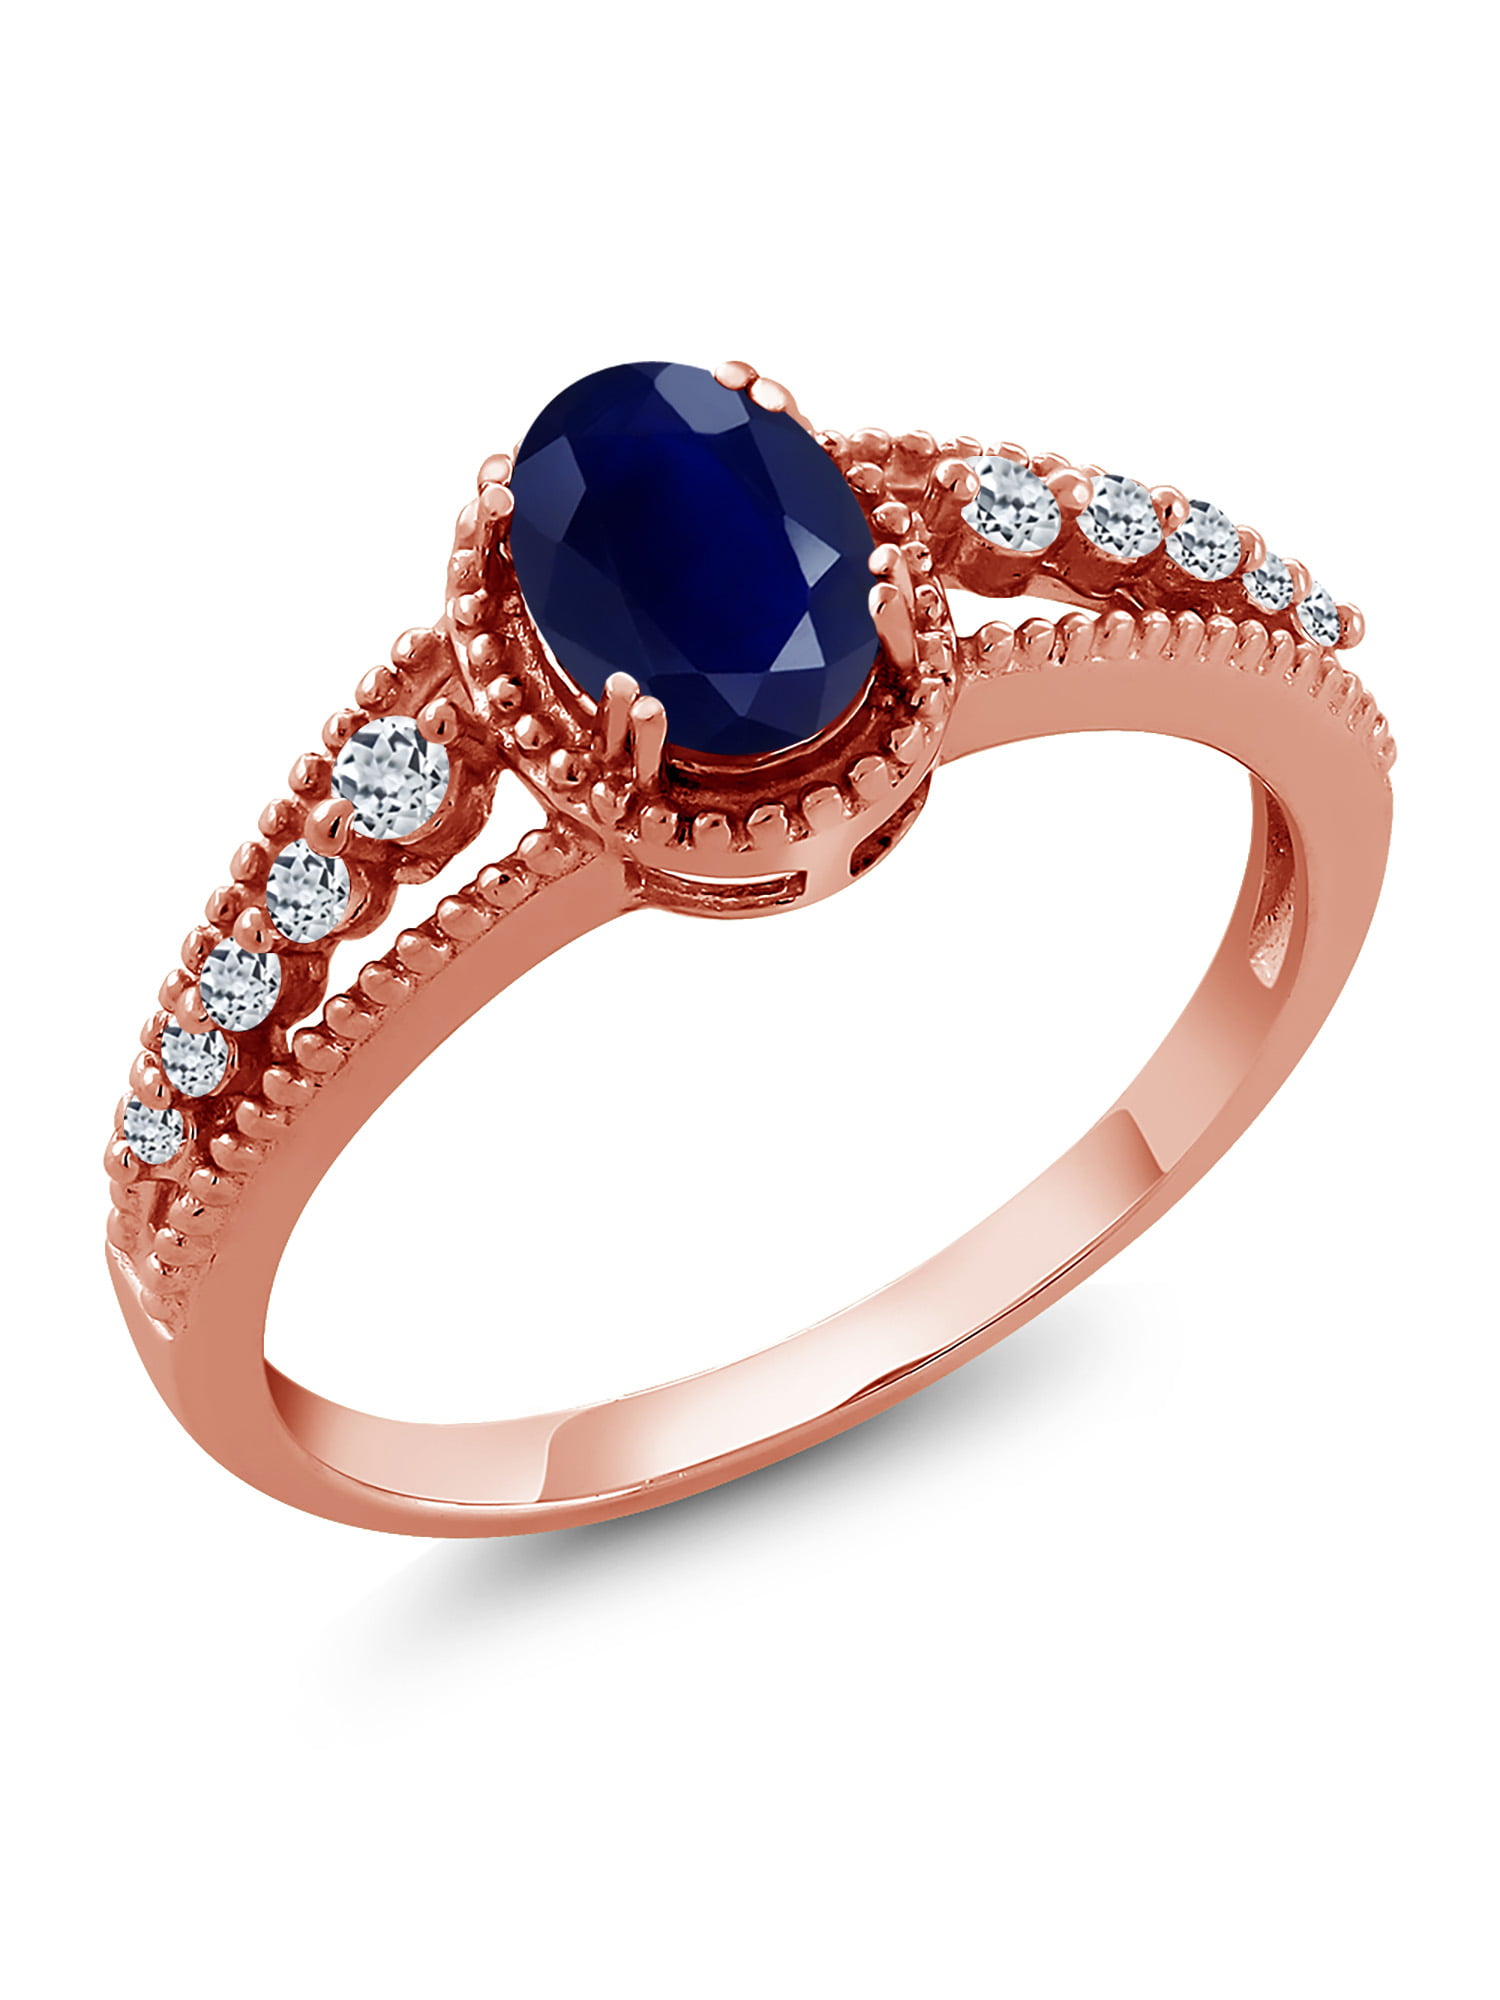 Gem Stone King 18K Rose Gold Plated Silver 1.21 Ct Oval Blue Sapphire White  Topaz Ring